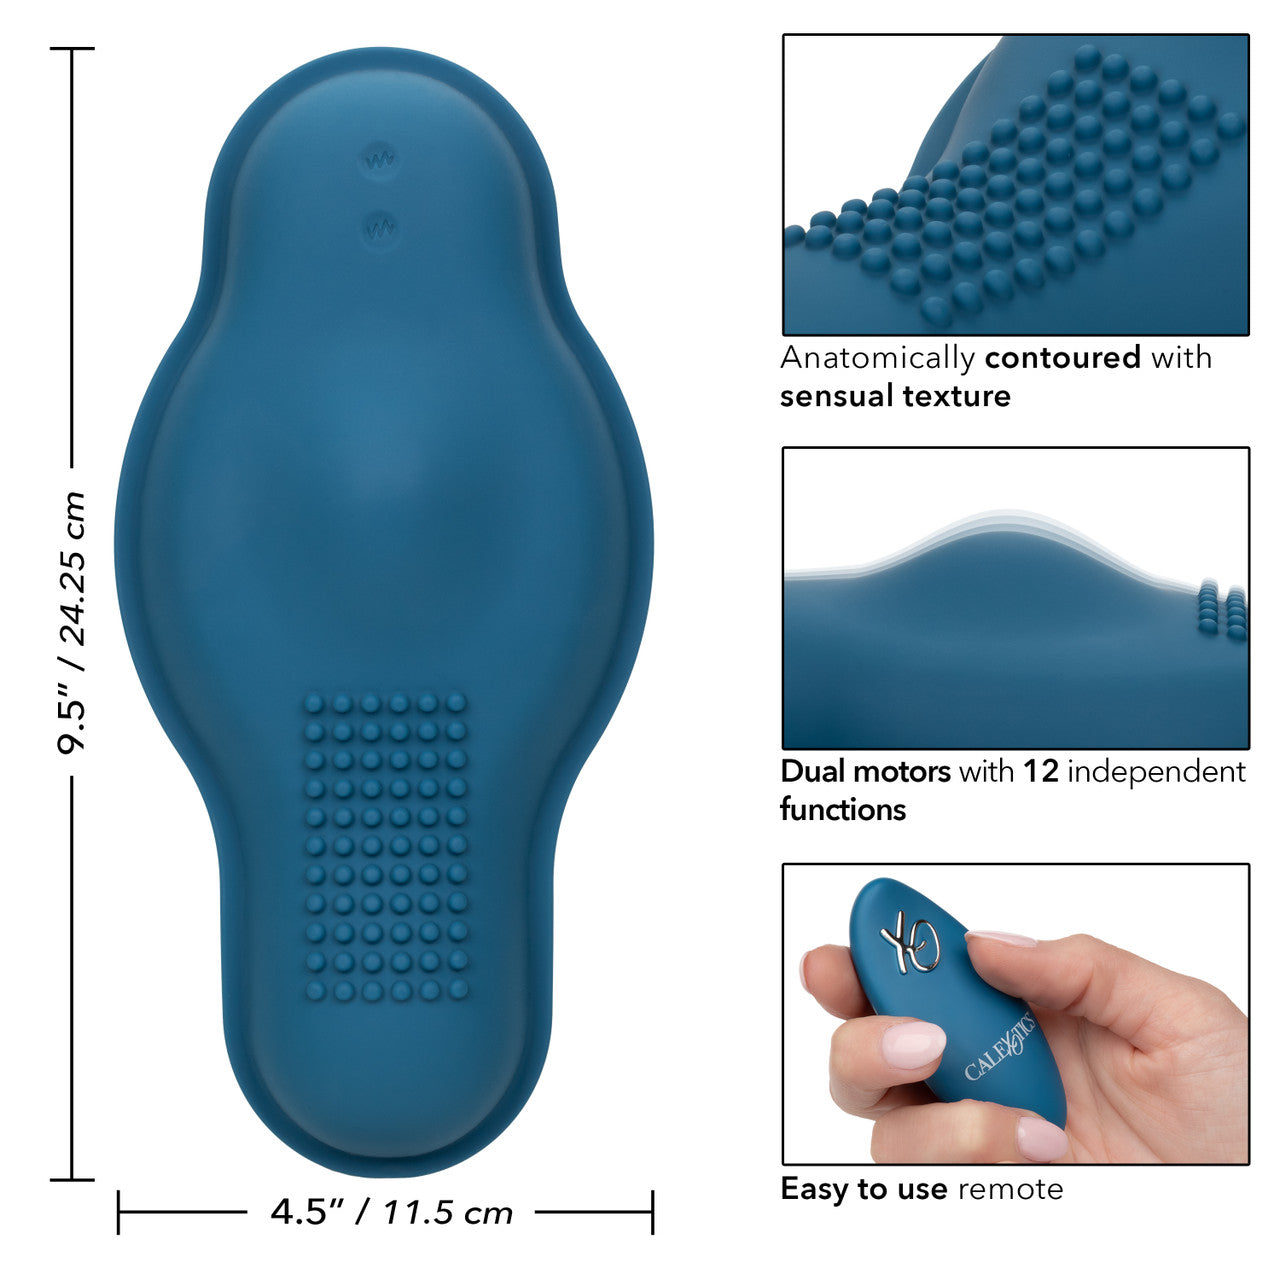 An illustration showing the size dimensions and functions of the Dual Rider Remote Control Bump and Grind.